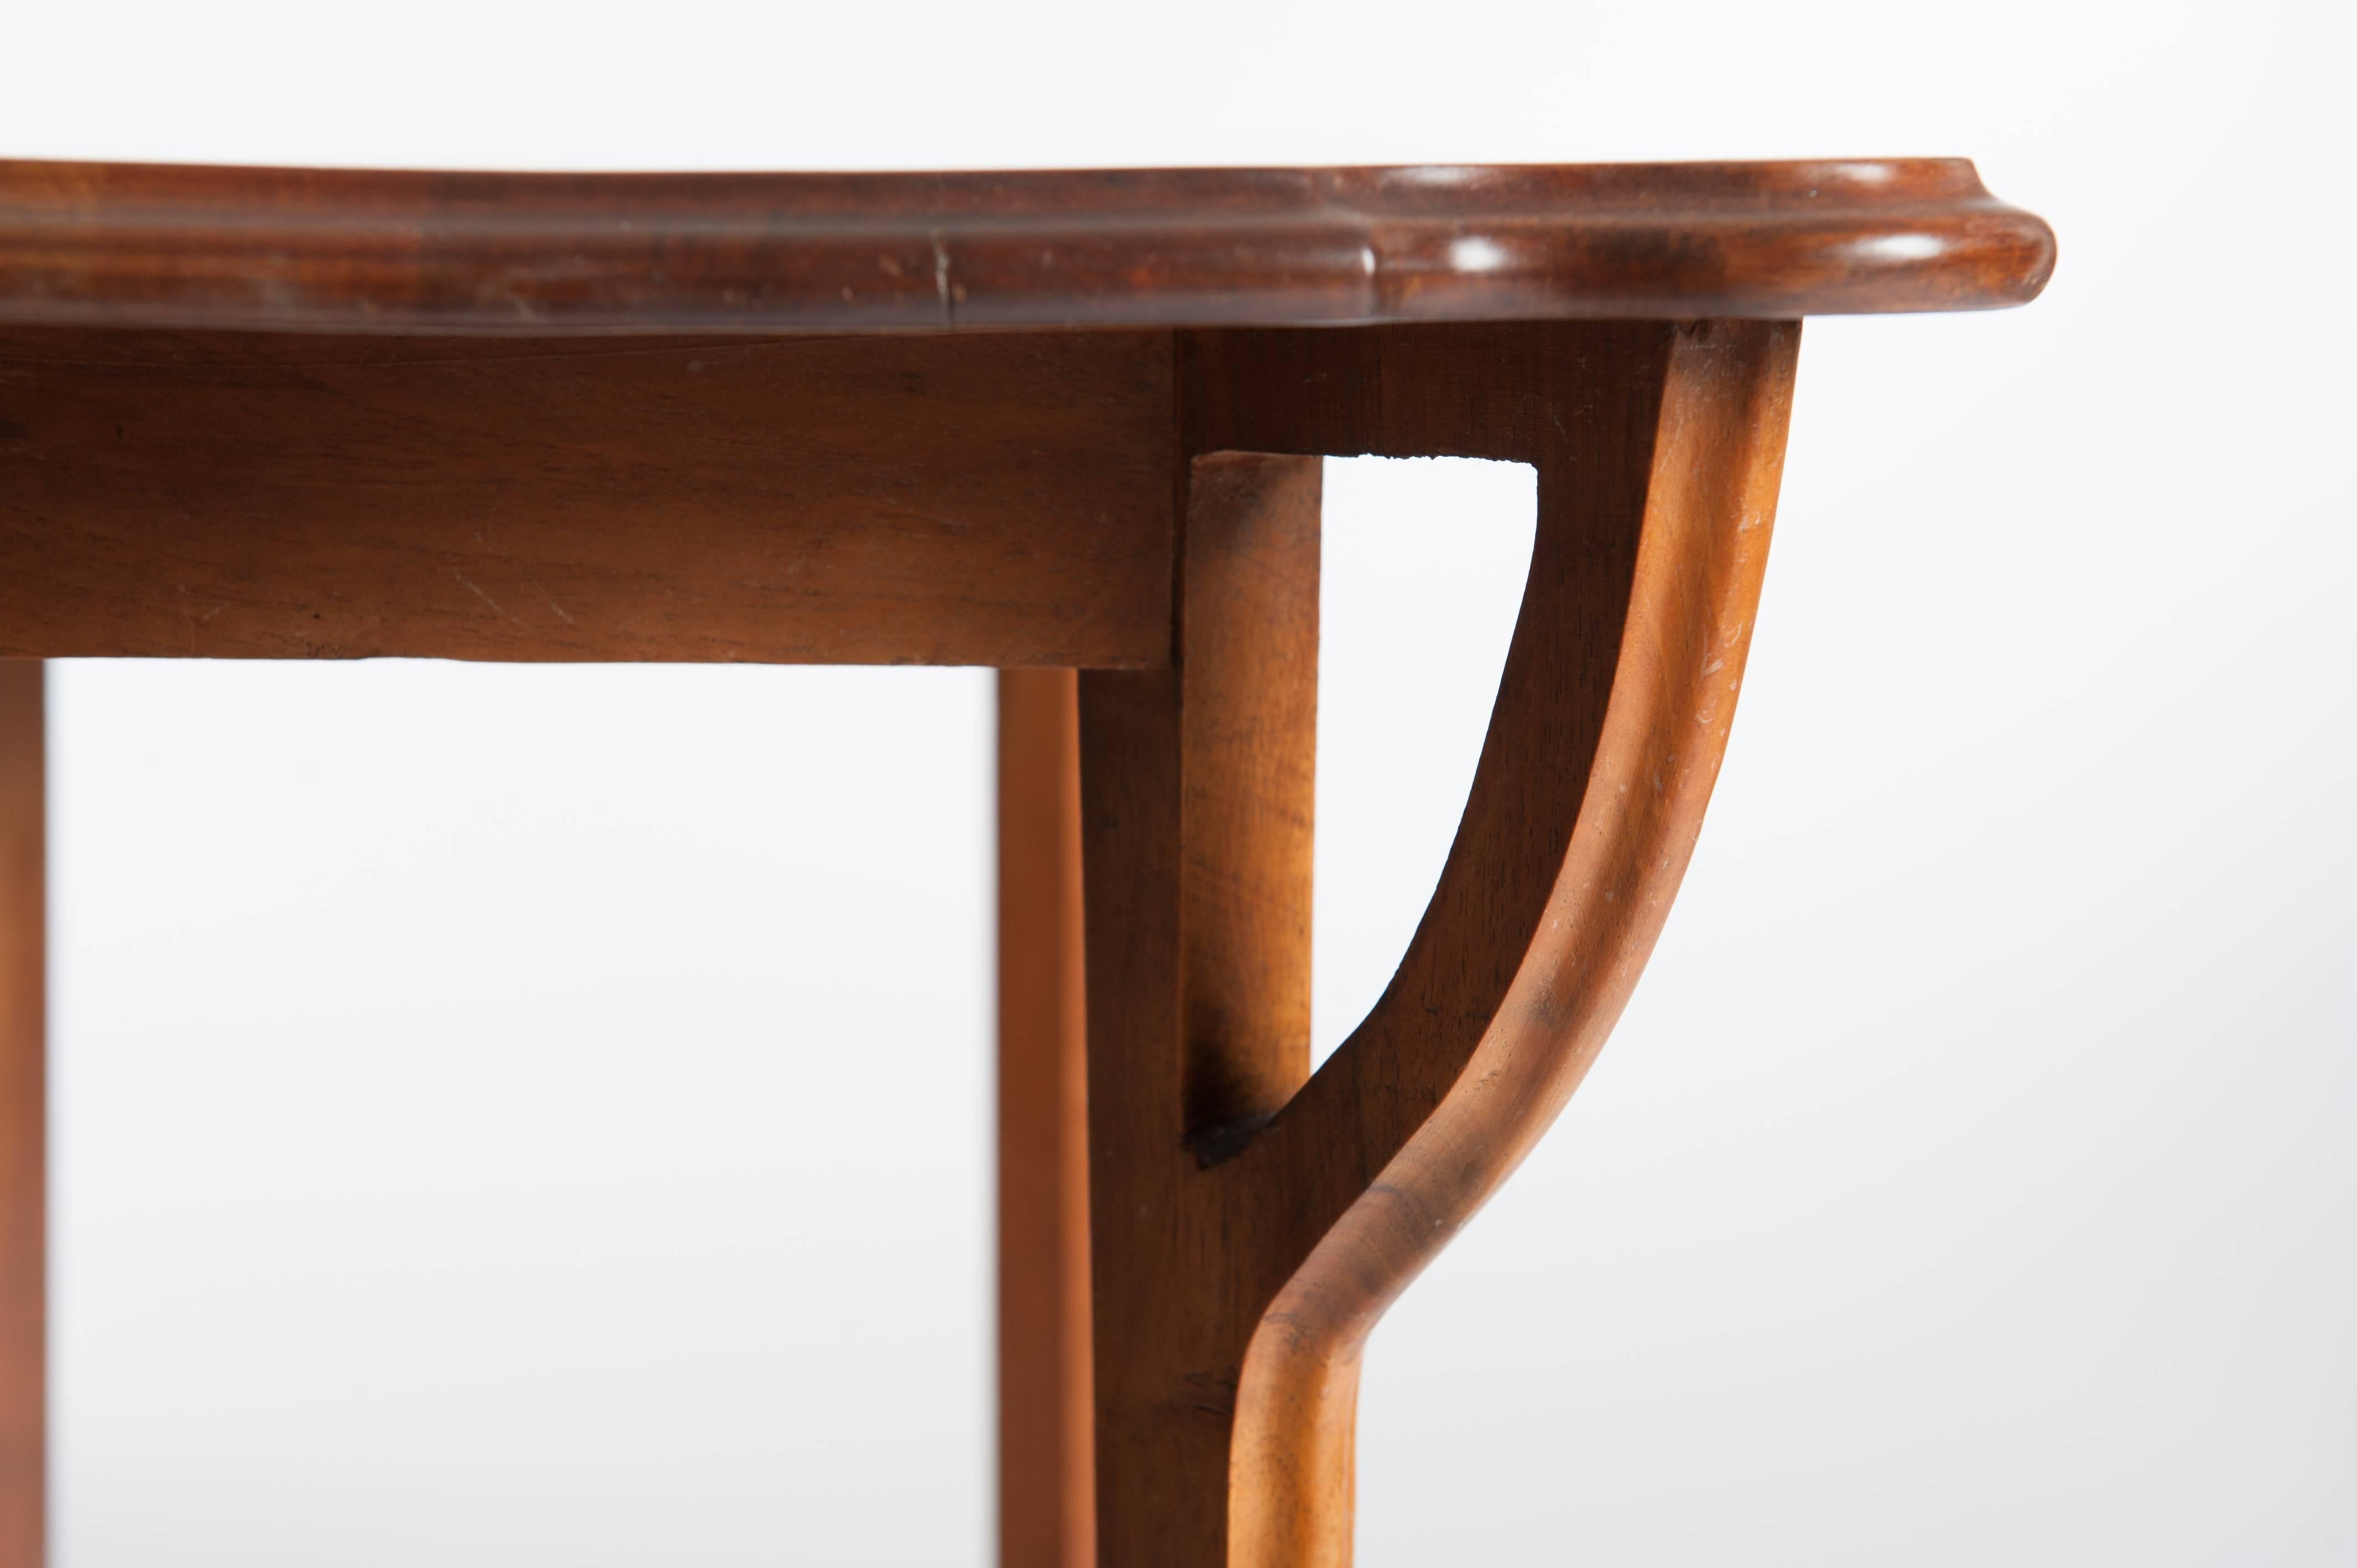 Early 20th Century French Art Nouveau Table Gueridon Rosewood with Inlays from Edouard Diot